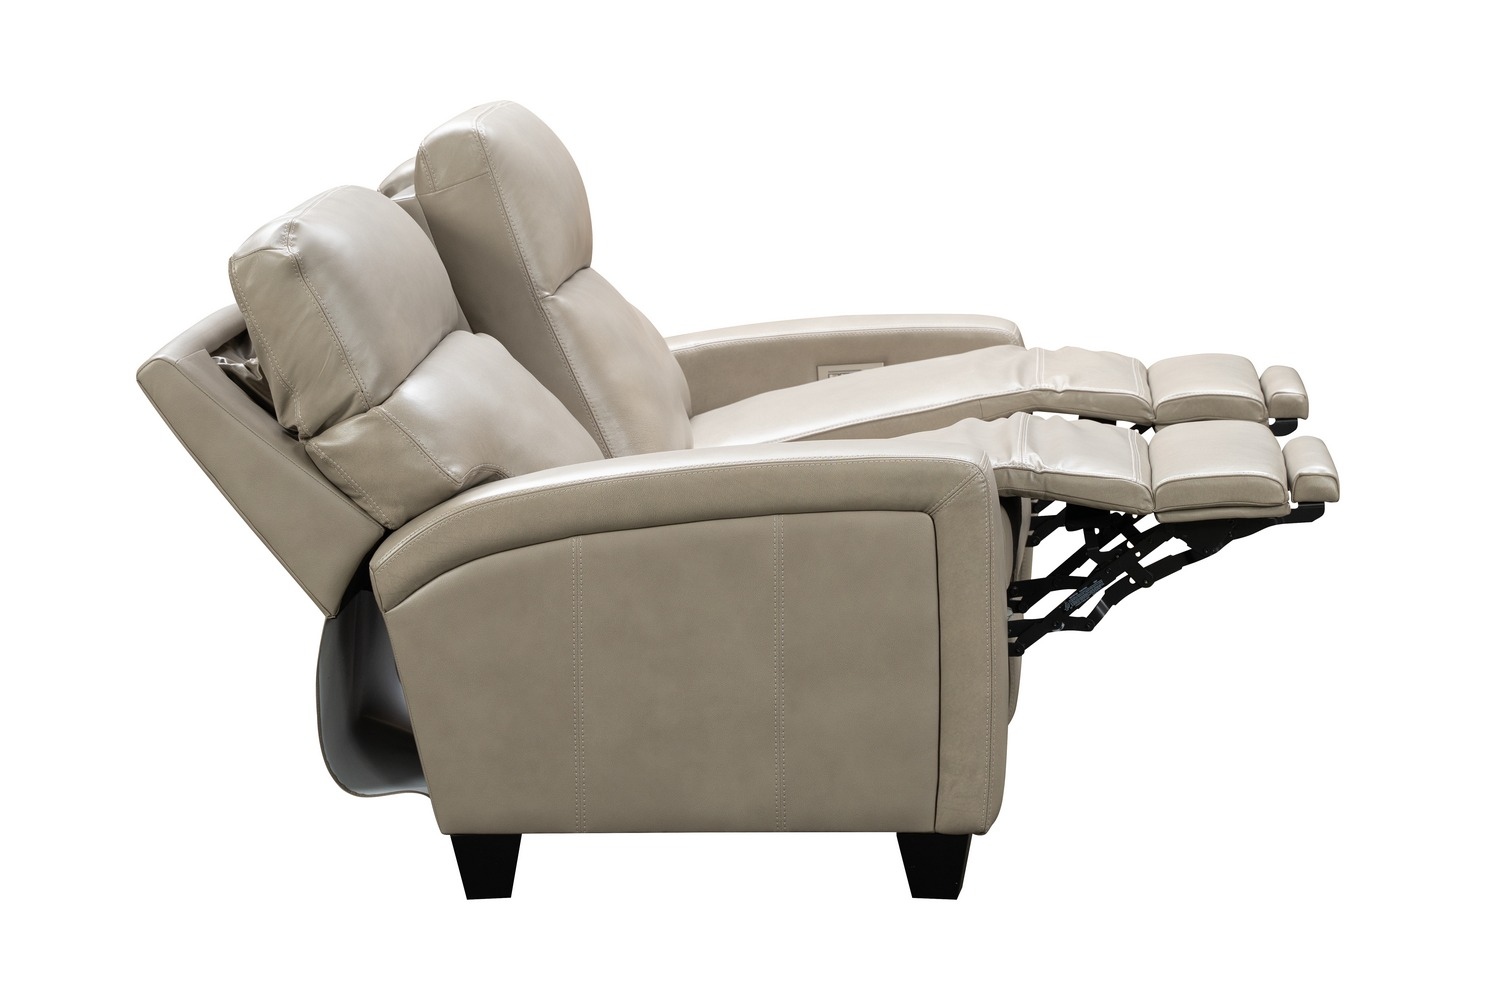 Barcalounger Marcello Power Reclining Sofa with Power Head Rests and Power Lumbar - Sergi Gray Beige/Leather Match